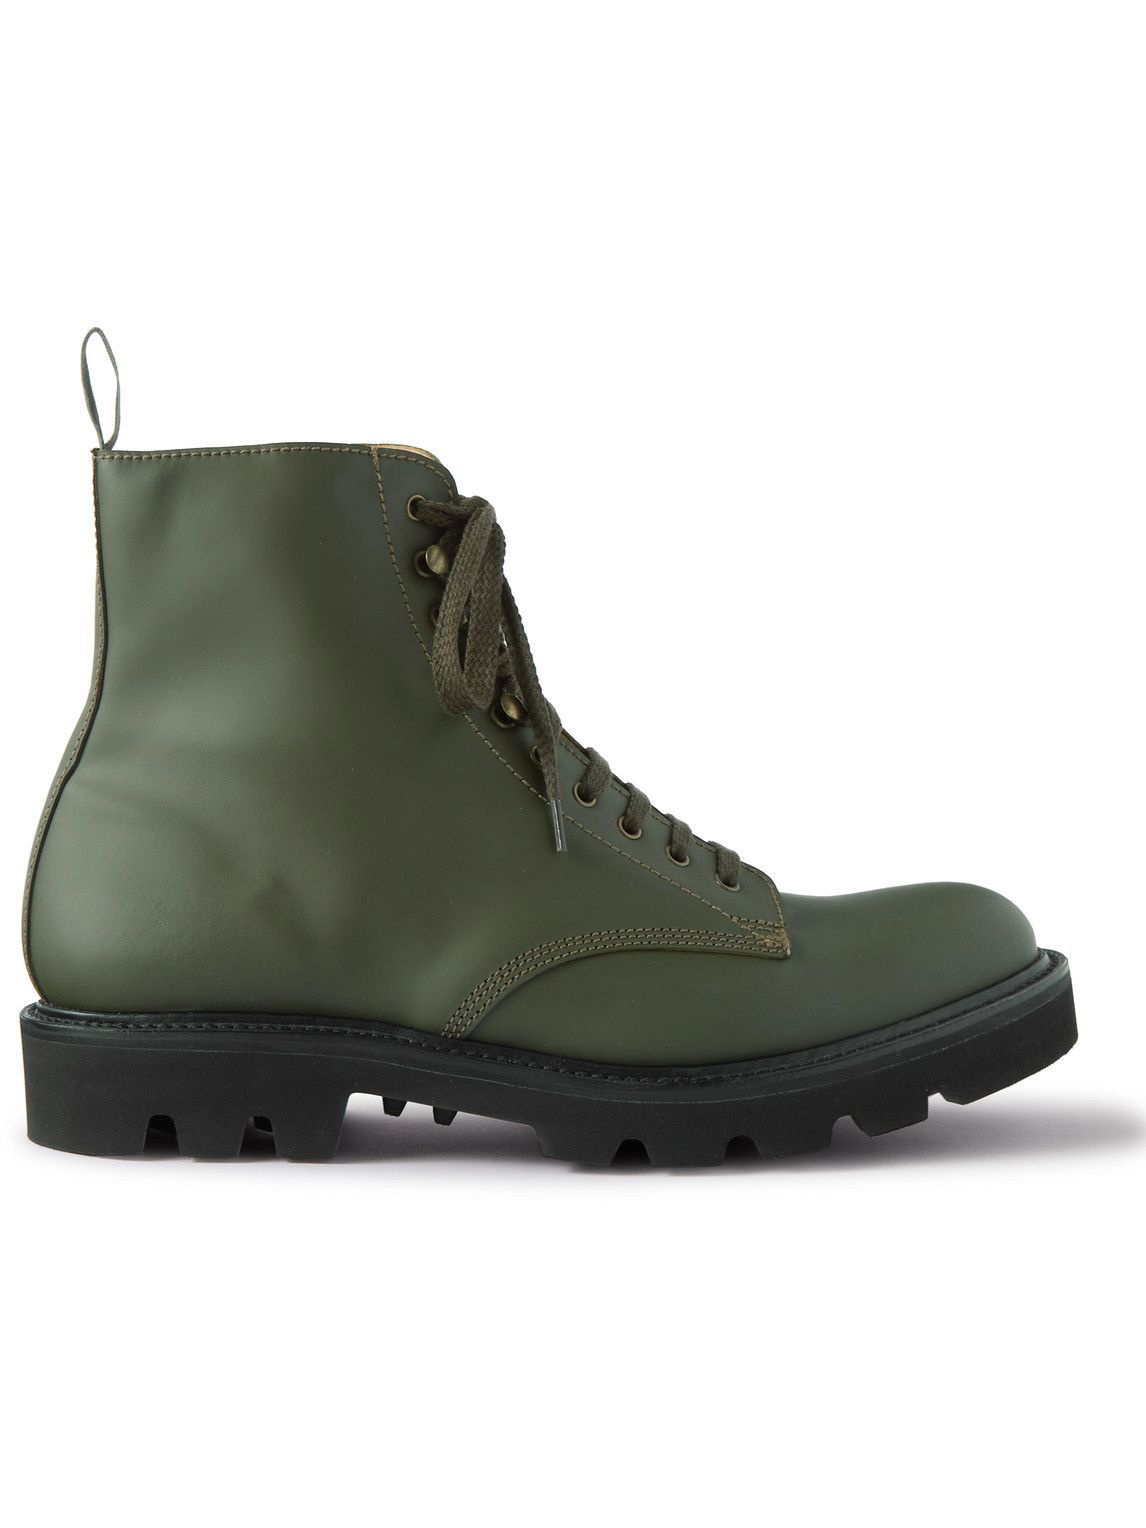 Grenson - Jude Rubberised Leather Boots - Green Grenson